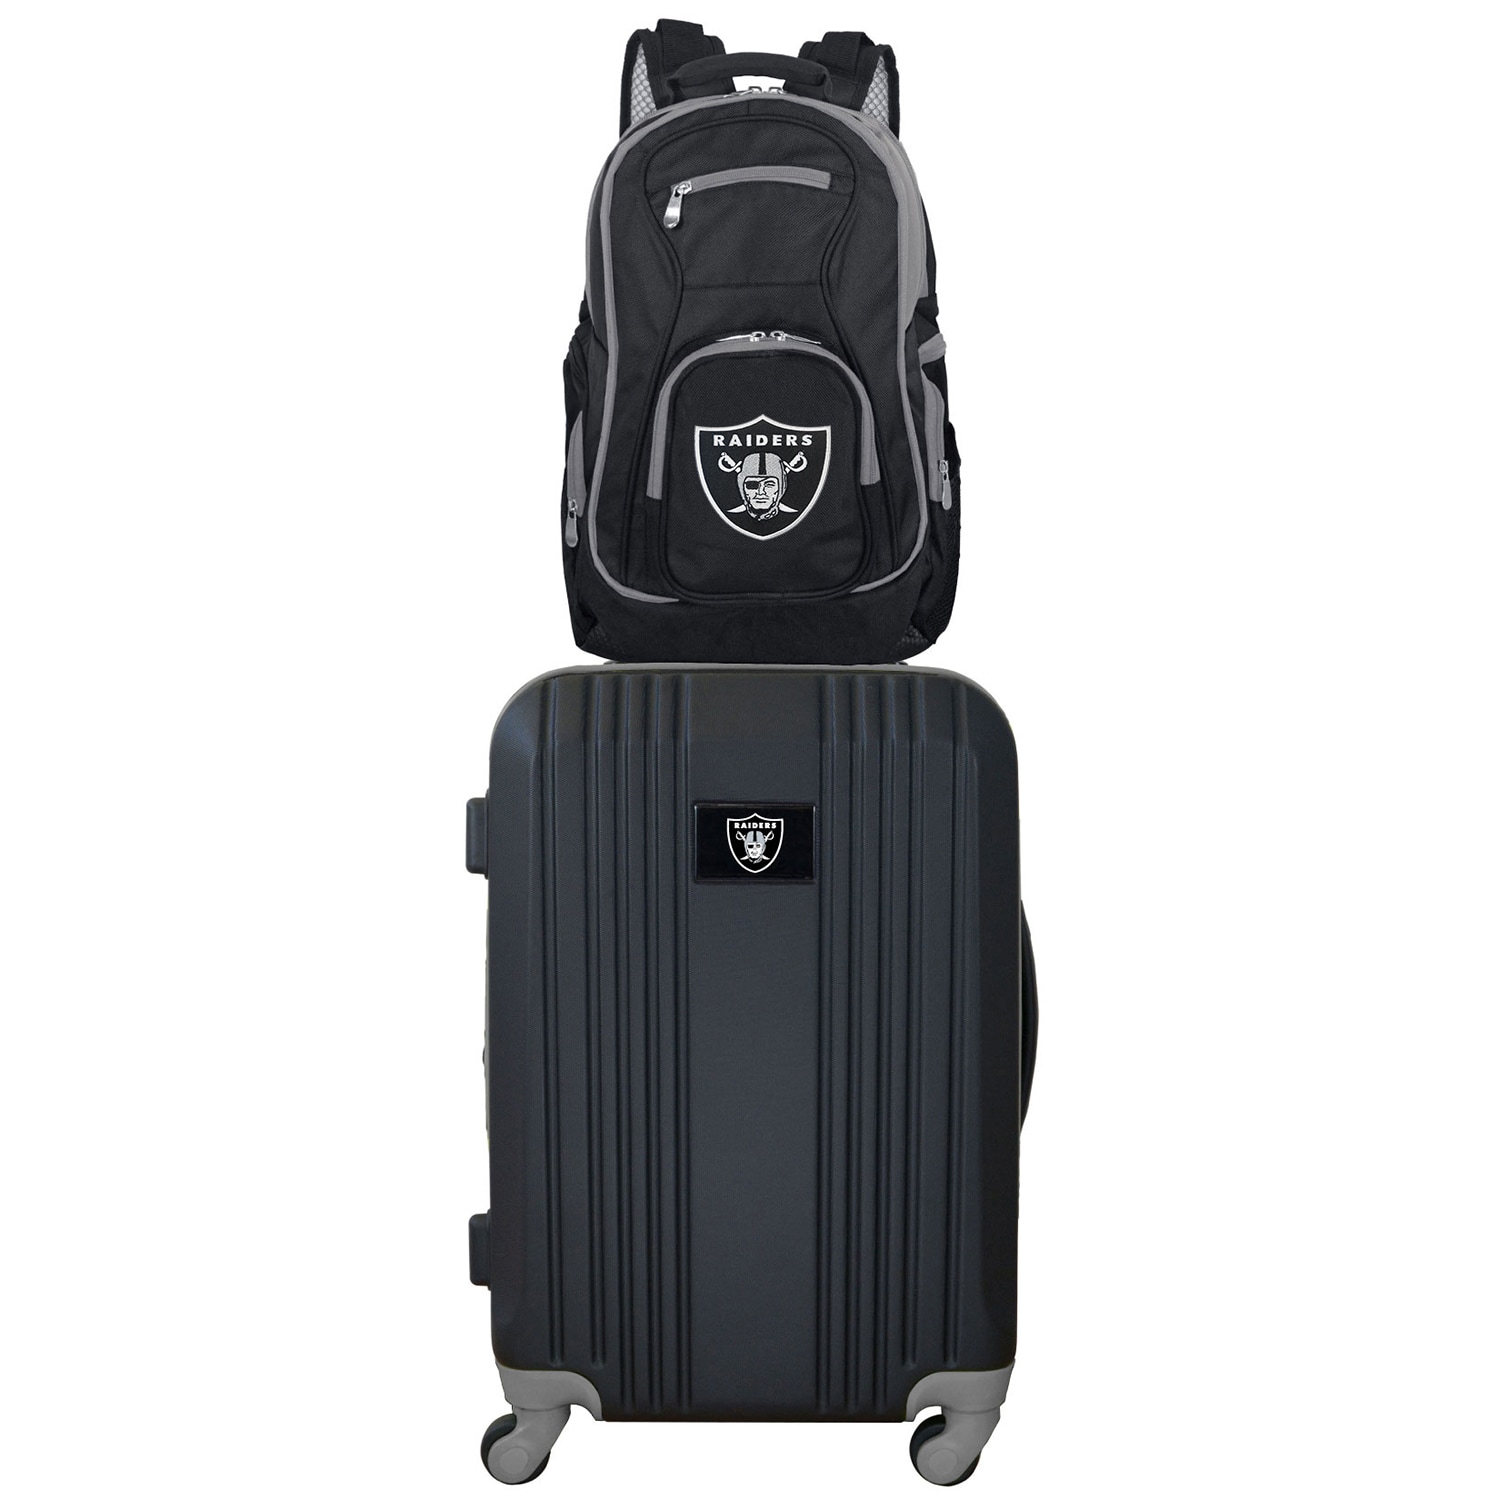 Includes 21-inch Two-Tone Hardcase Spinner and 19 Laptop Backpack Denco Las Vegas Raiders 2-Piece Luggage Set